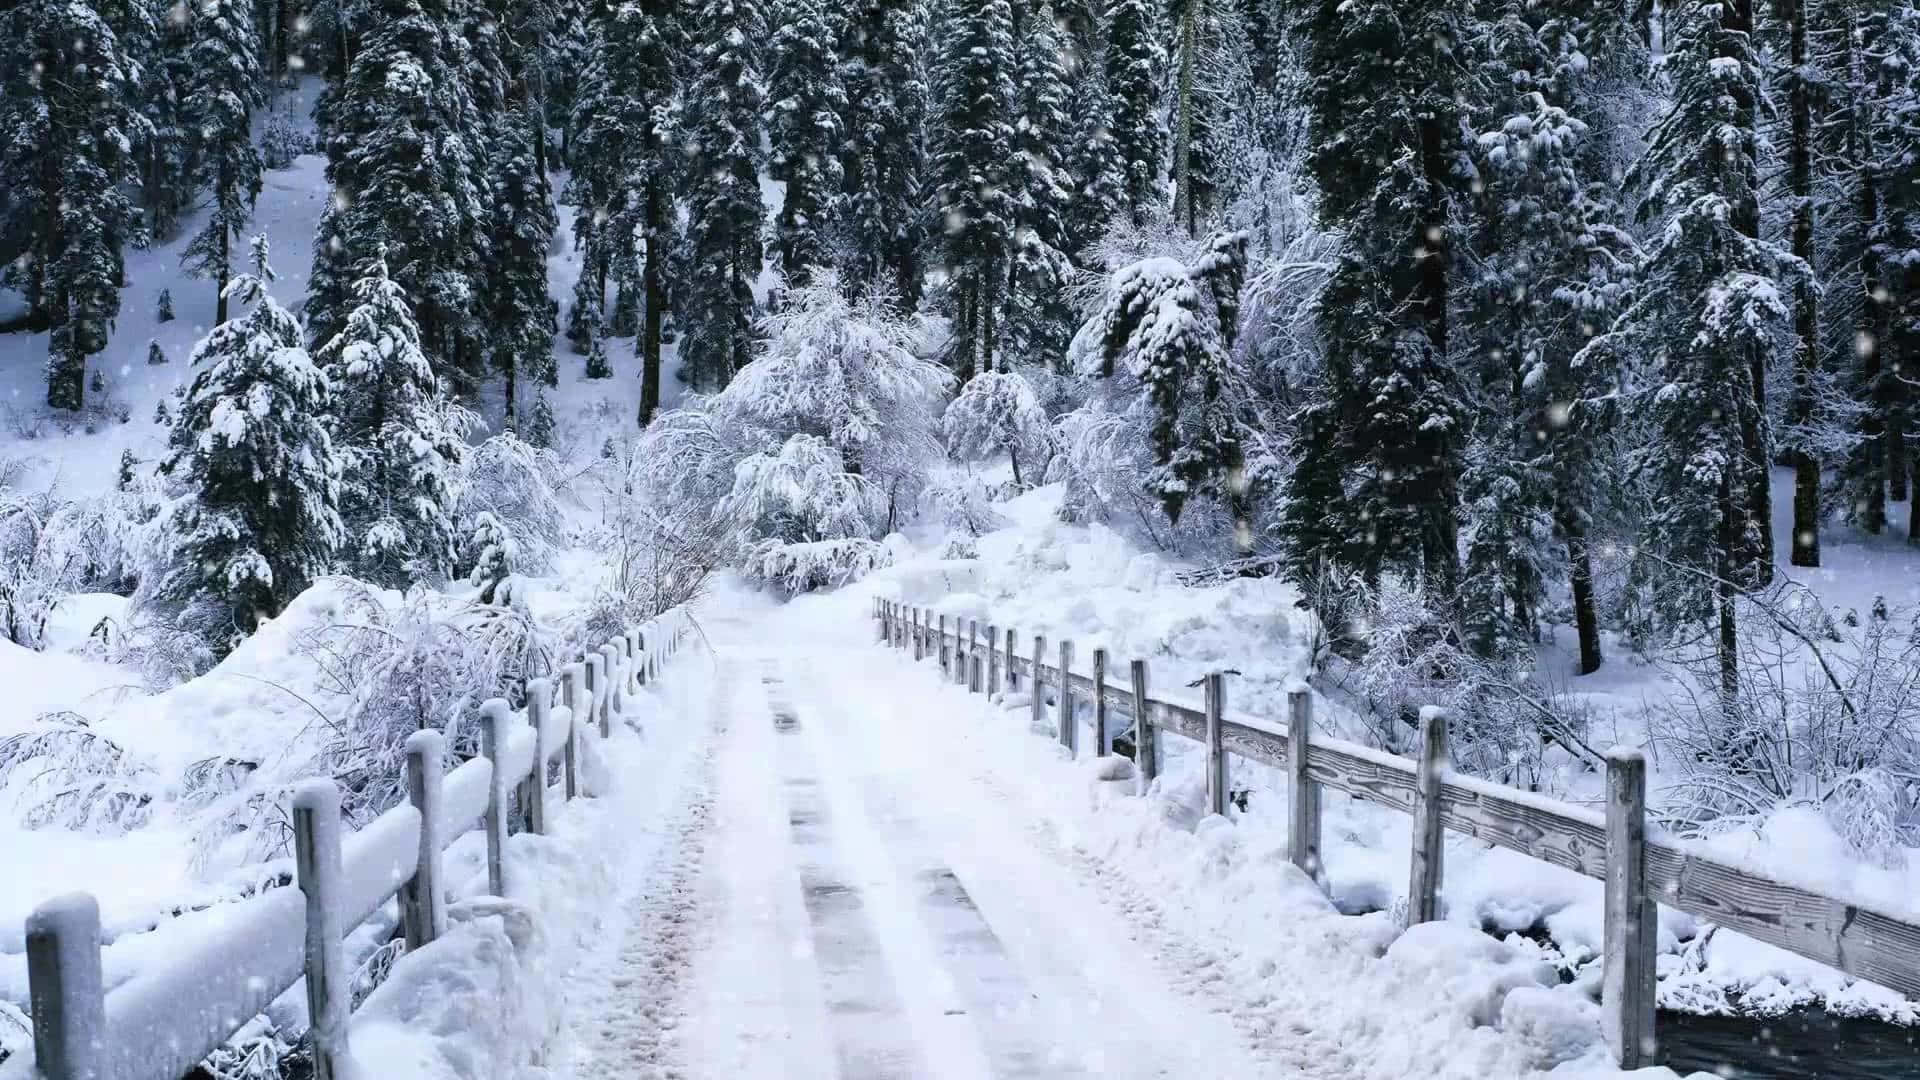 Fresh snowfall in the wintery forest